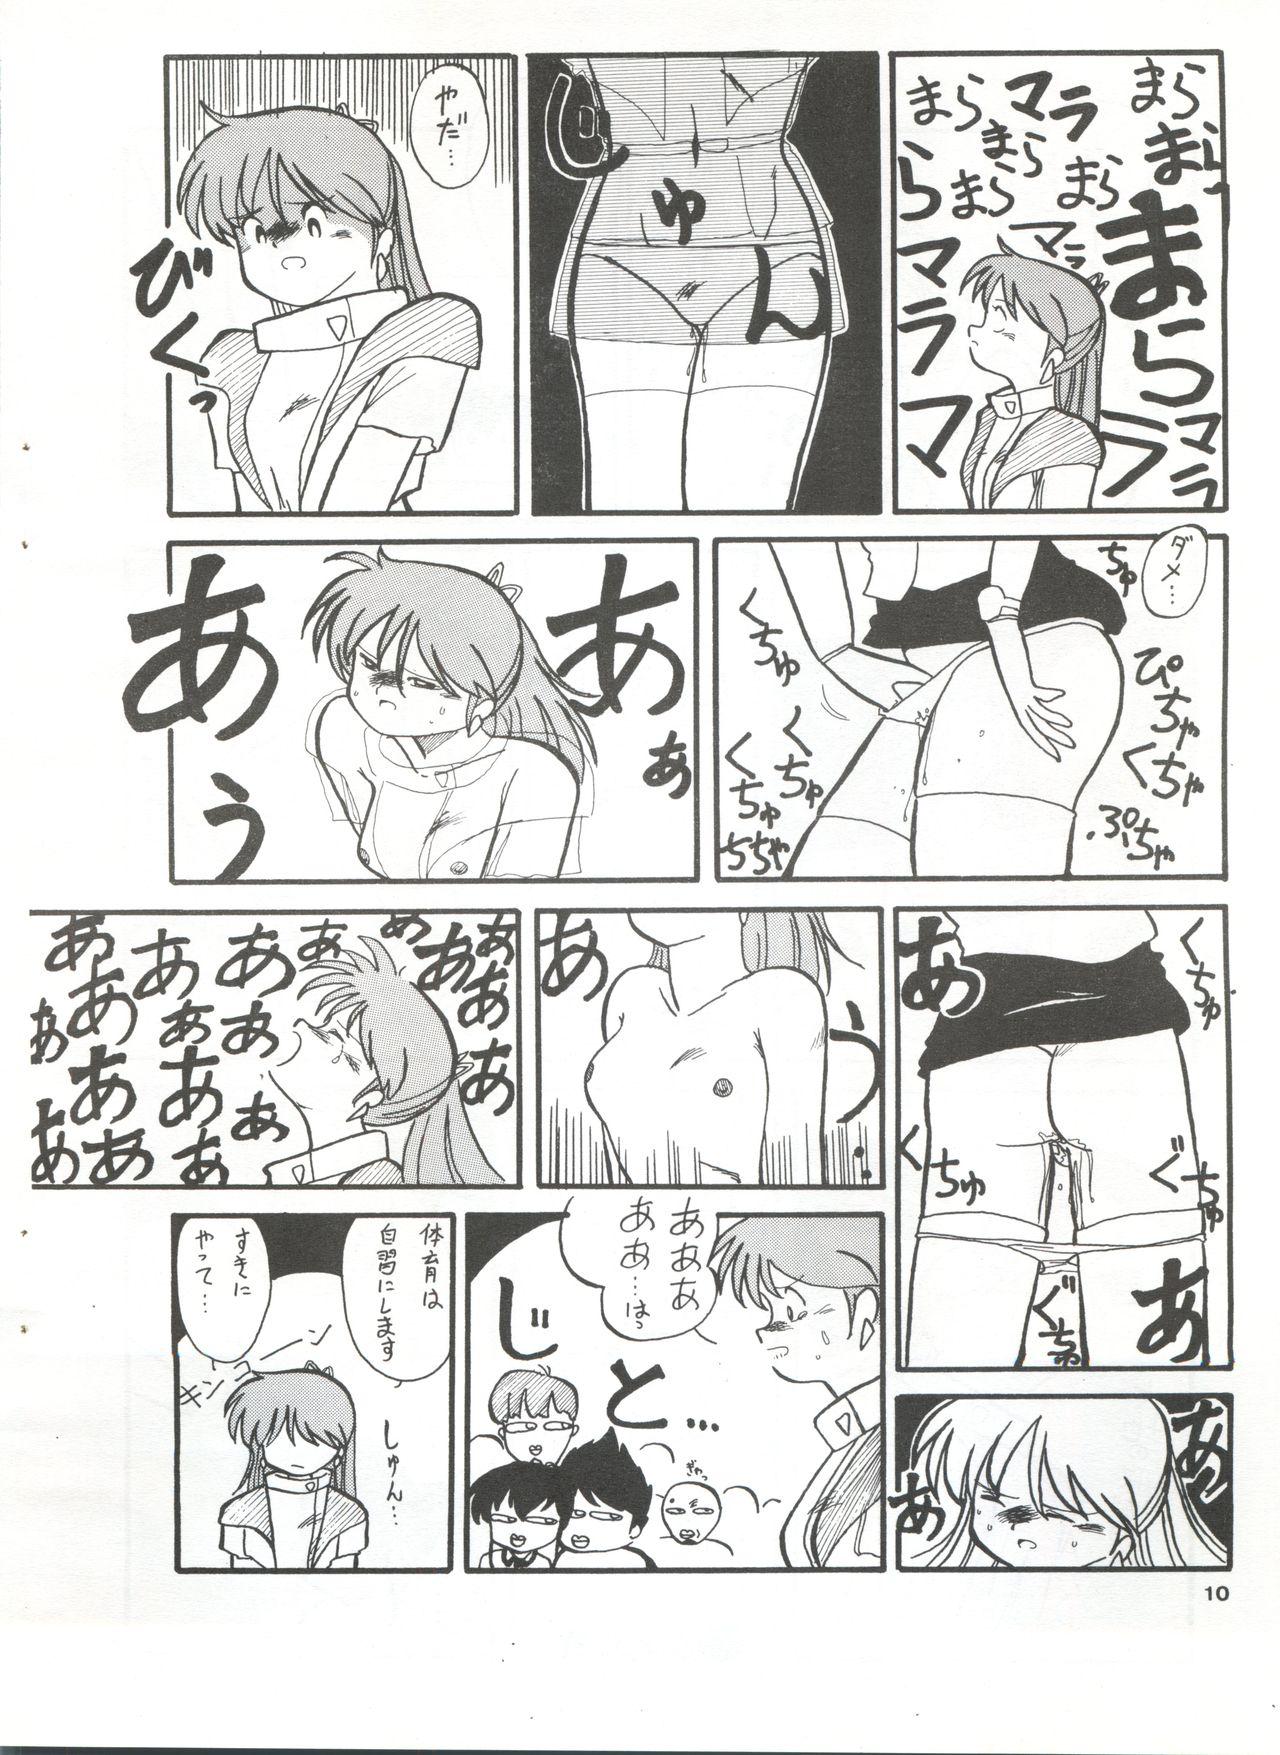 Huge YATTE! YATTE! Mission 1 - Dirty pair Sonic soldier borgman Pain - Page 9